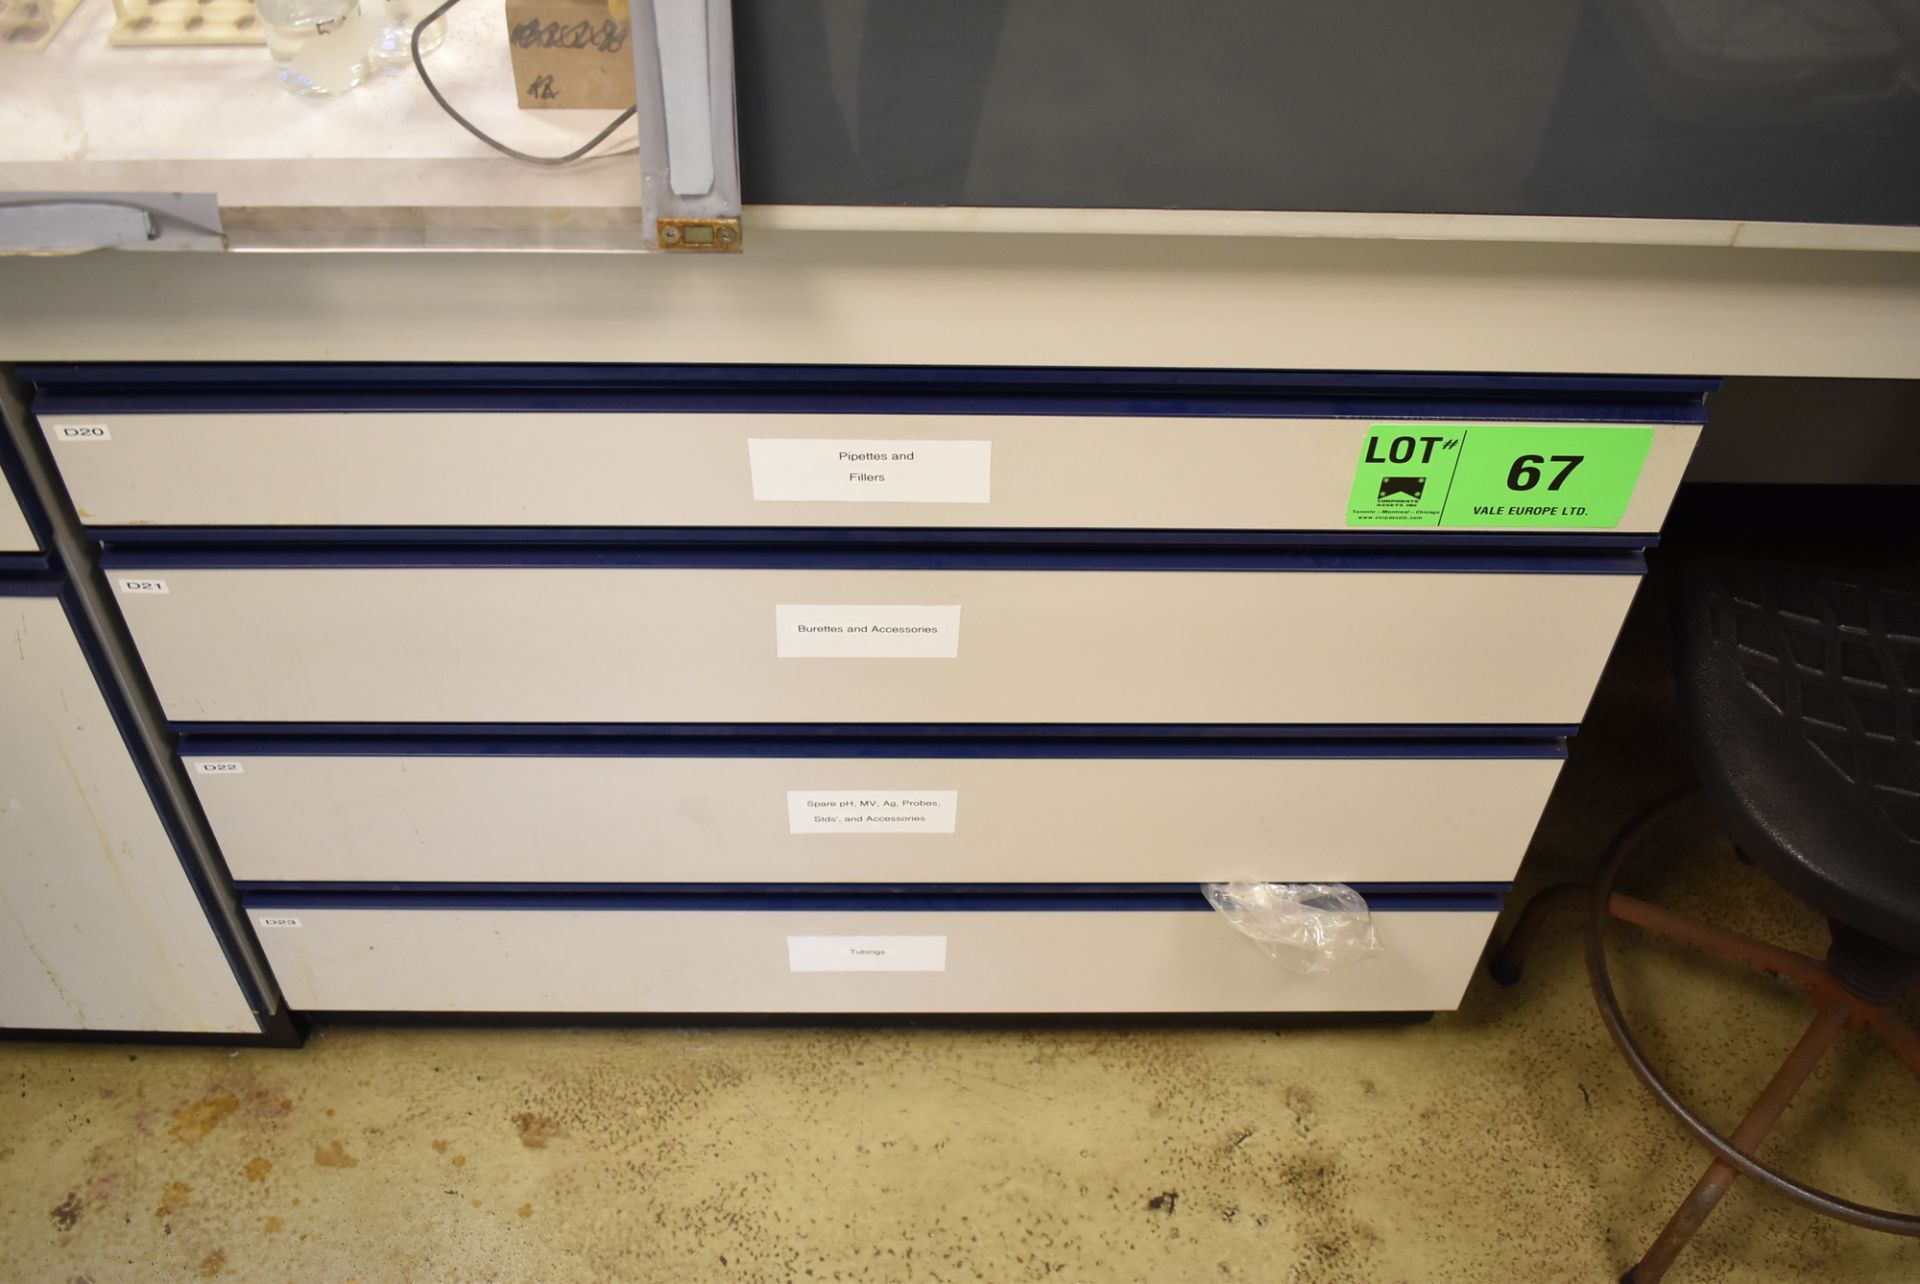 LOT/ 4 DRAWER LAB STORAGE CABINET WITH CONTENTS - PIPETTES, DURETTES, PROBES & ACCESSORIES (ROOM